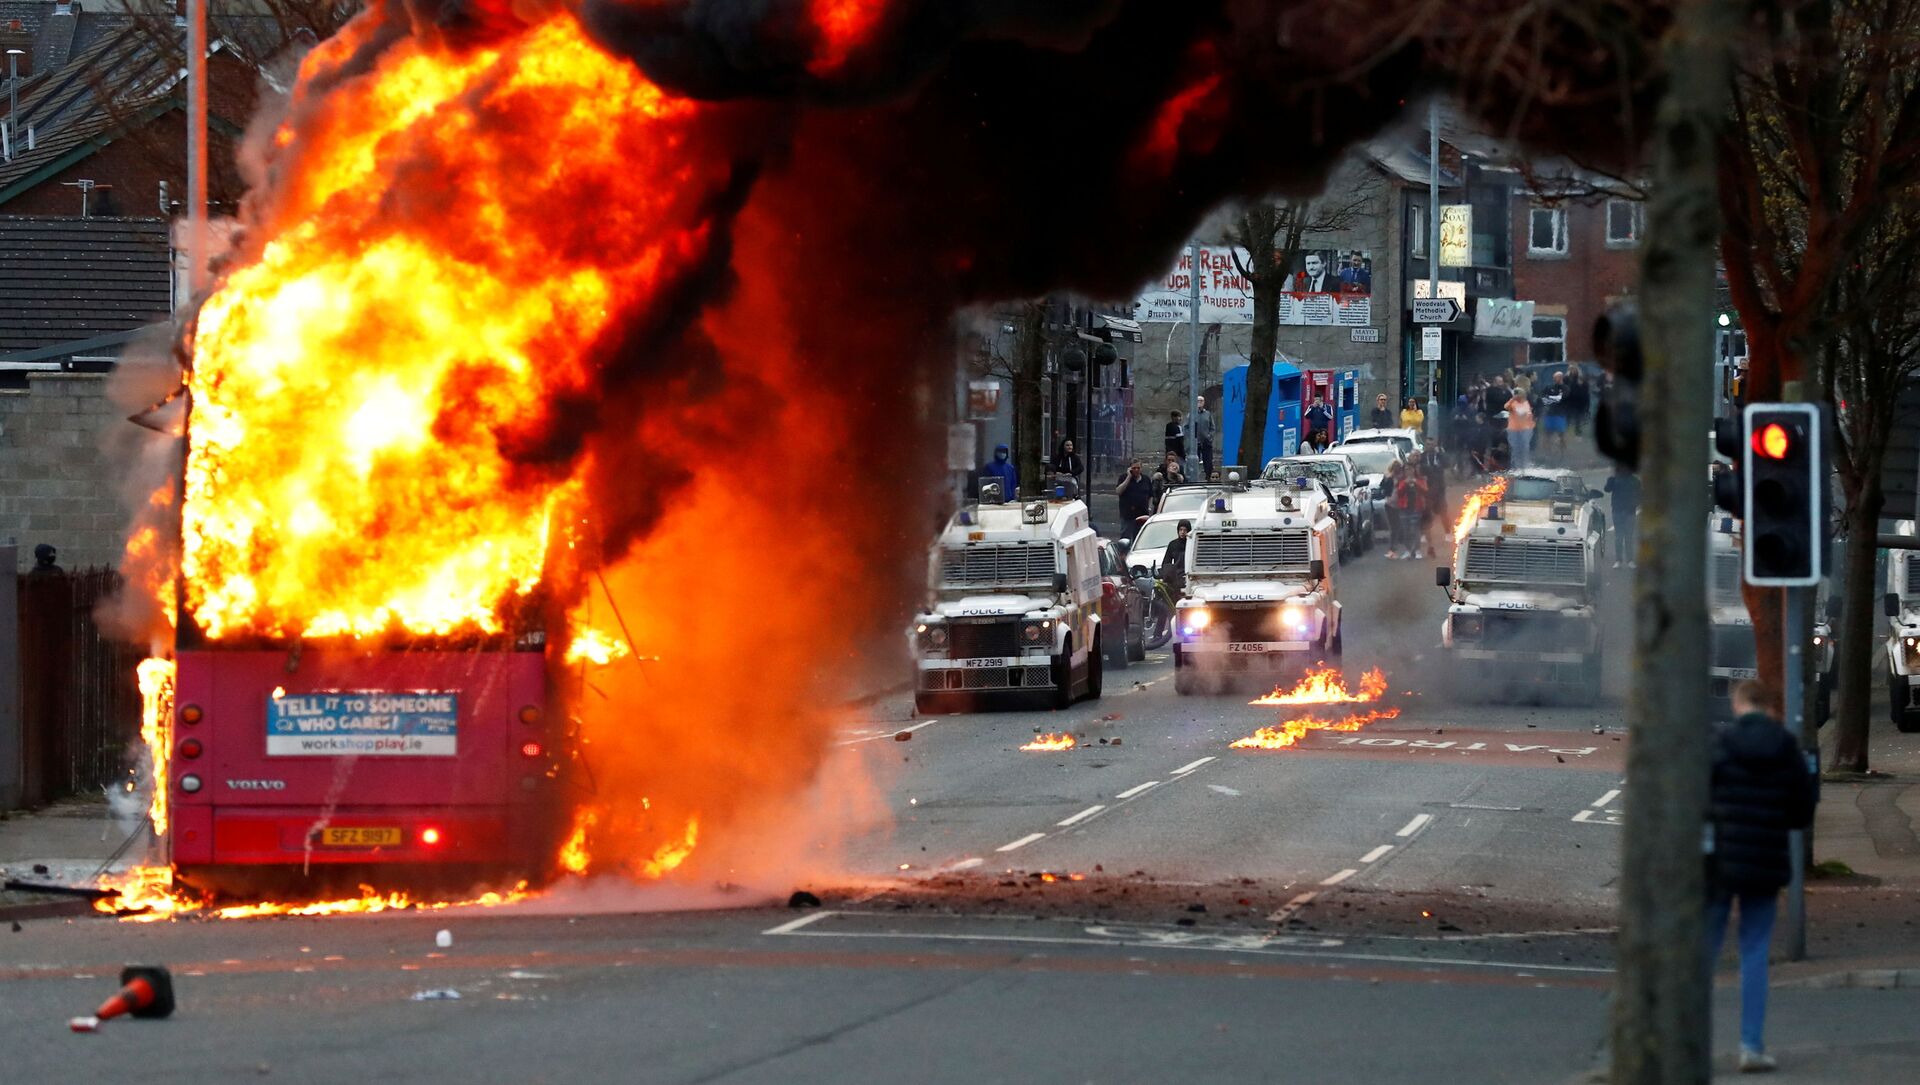 Police vehicles are seen behind a hijacked bus burns on the Shankill Road as protests continue in Belfast, Northern Ireland, April 7, 2021 - Sputnik International, 1920, 08.04.2021